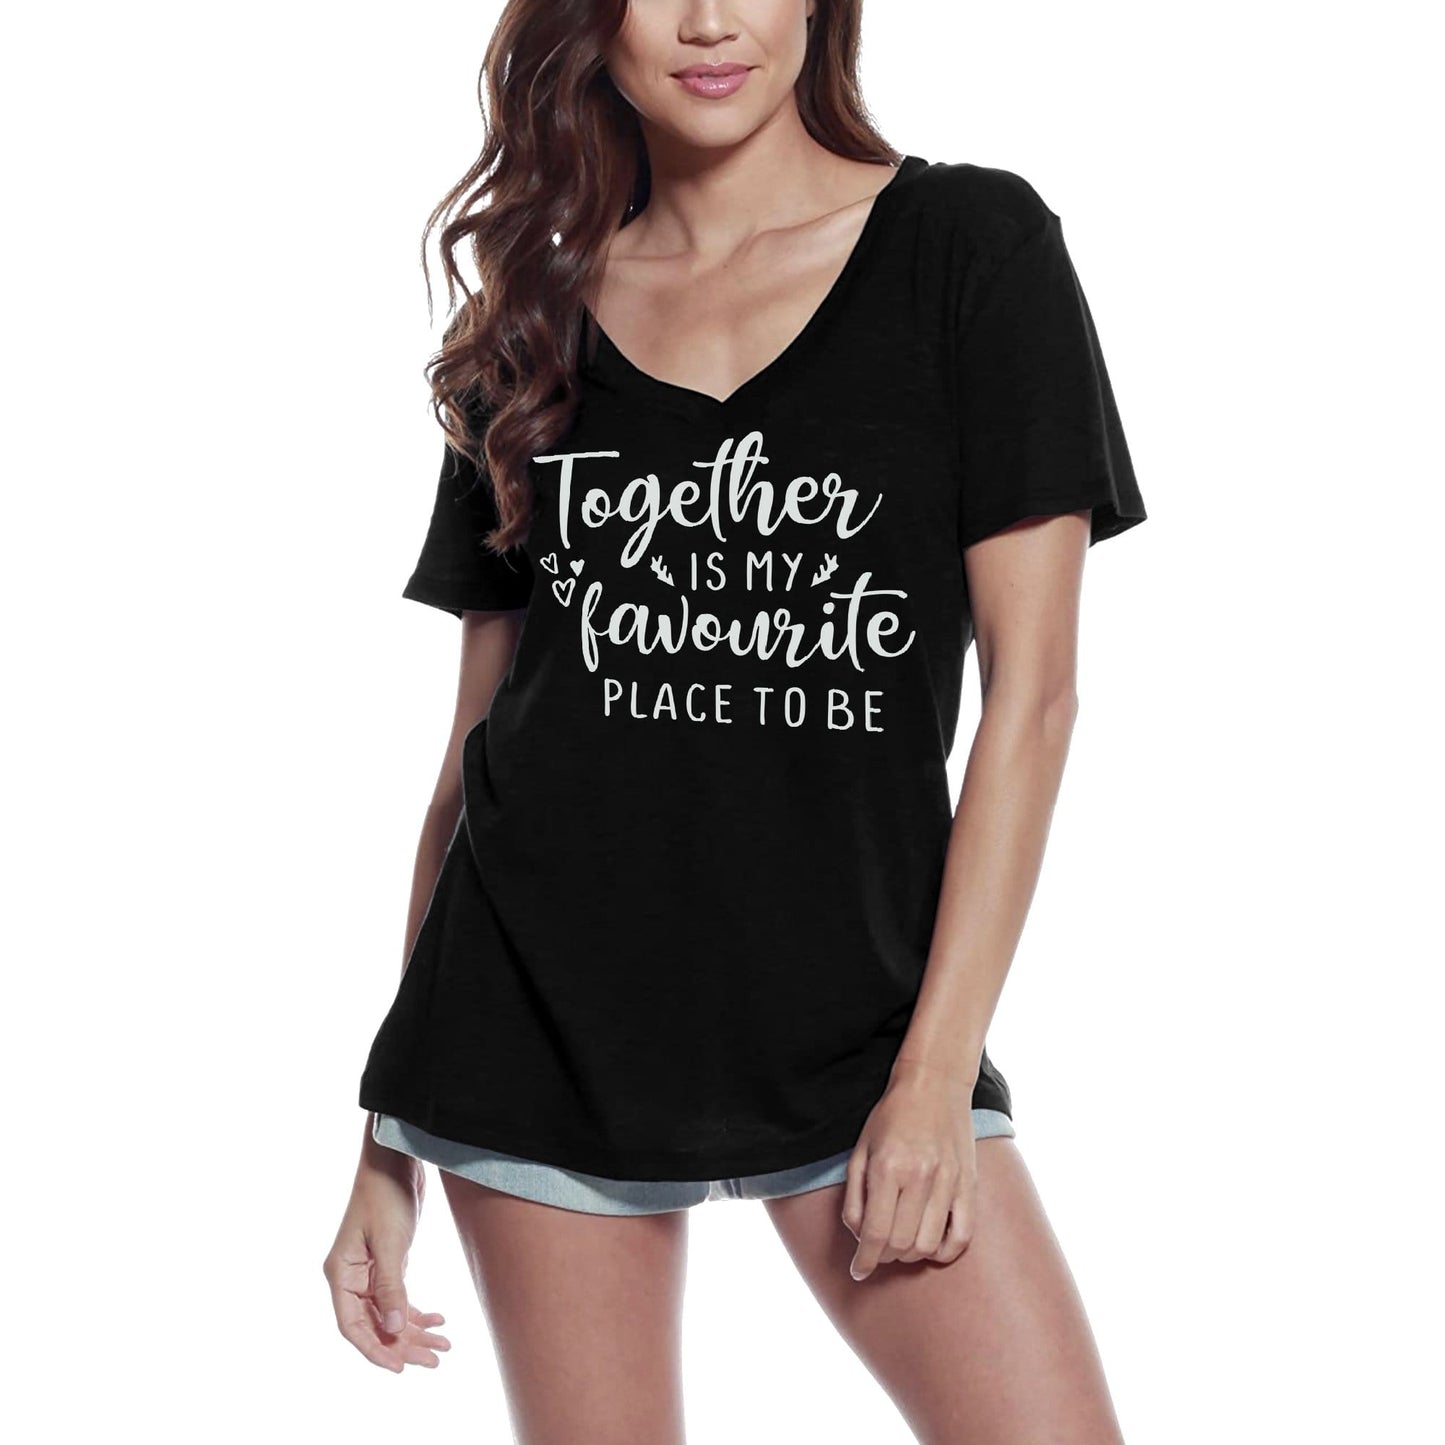 ULTRABASIC Women's T-Shirt Together is My Favorite Place to Be - Short Sleeve Tee Shirt Tops